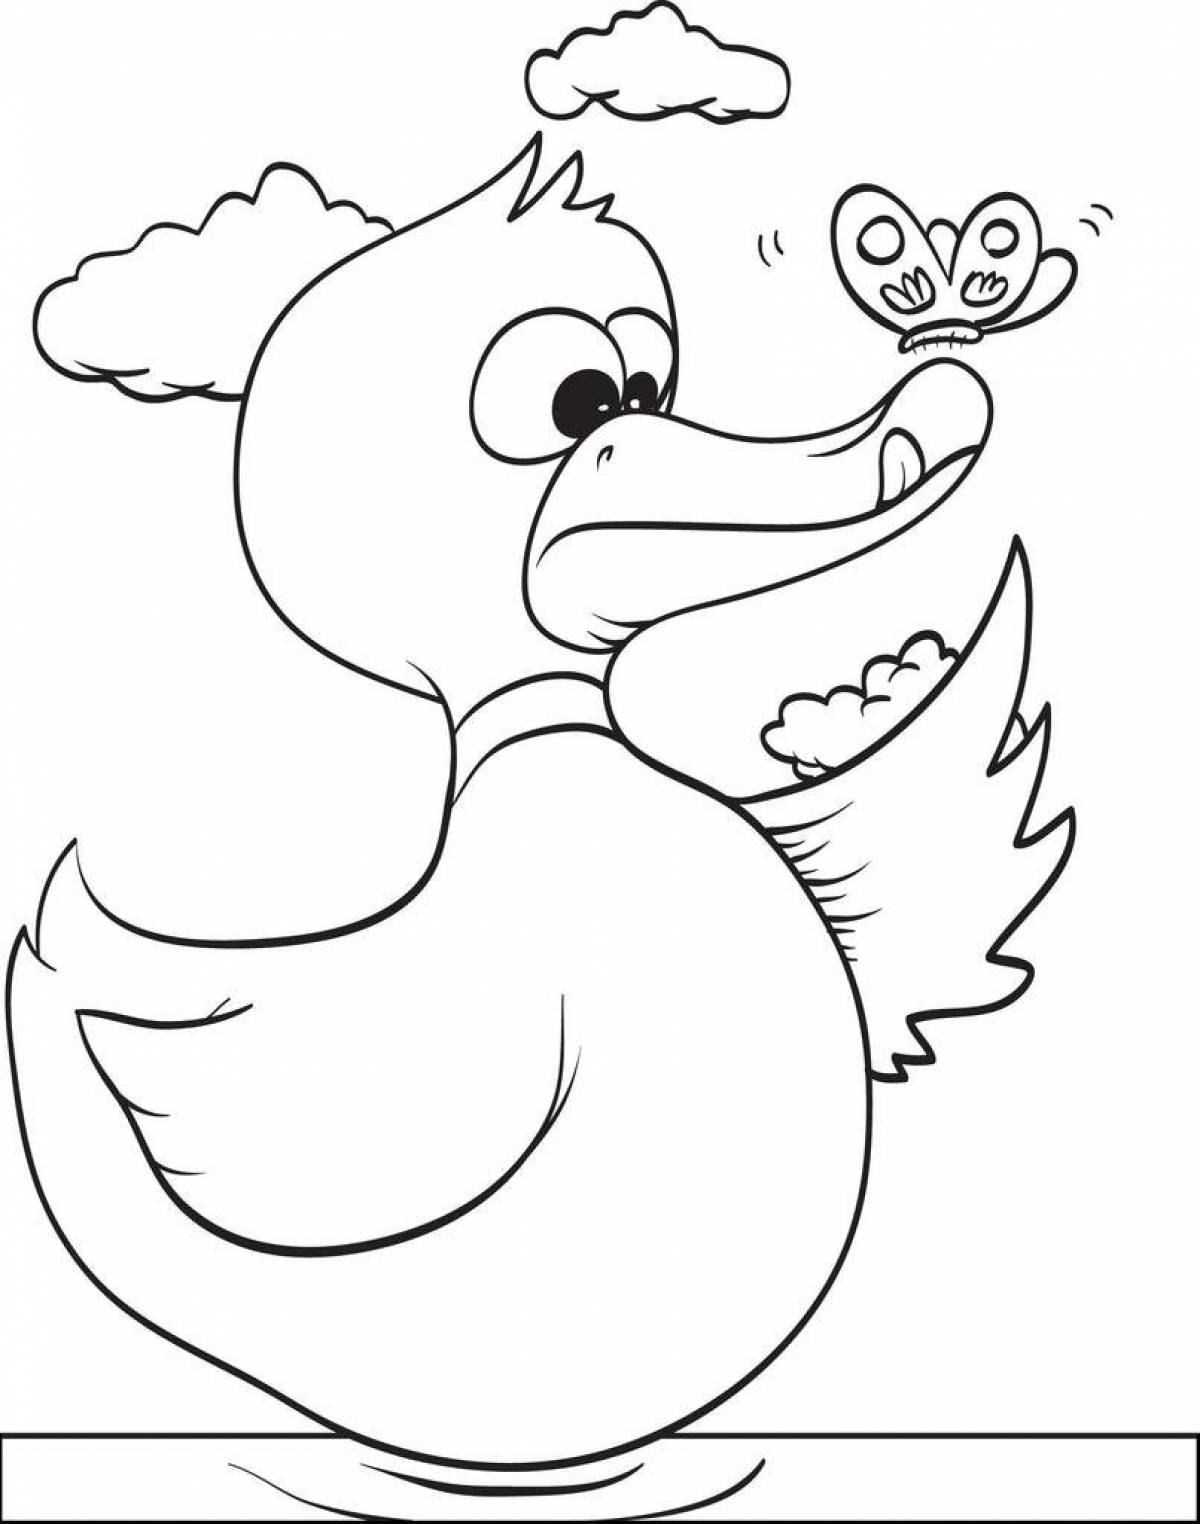 Lalafan duck coloring page